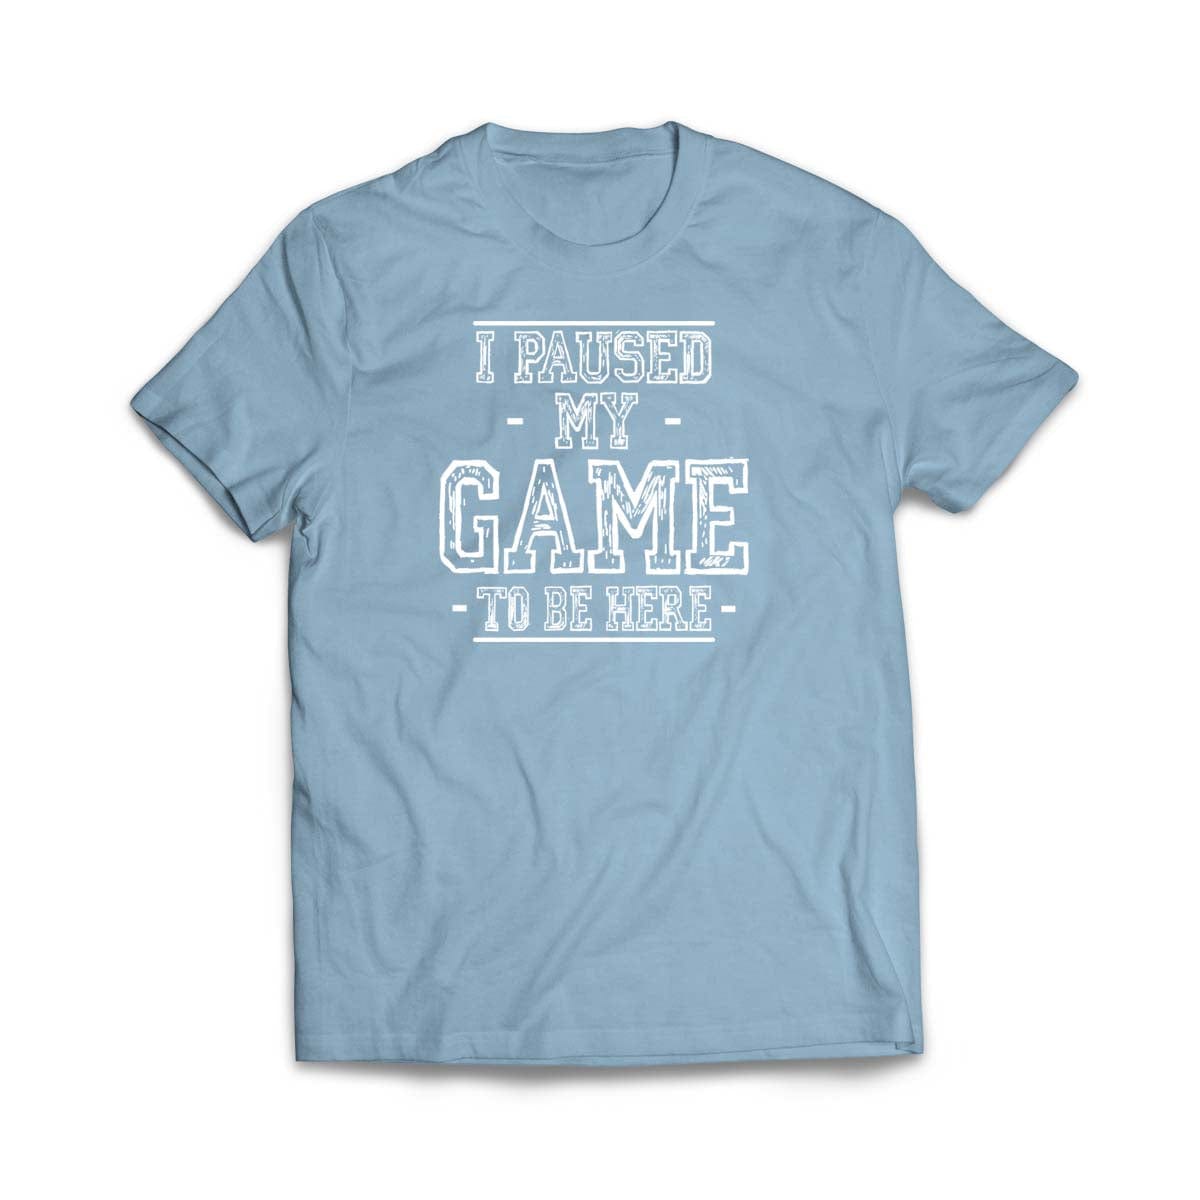 I Paused My Game to Be Here T-Shirt